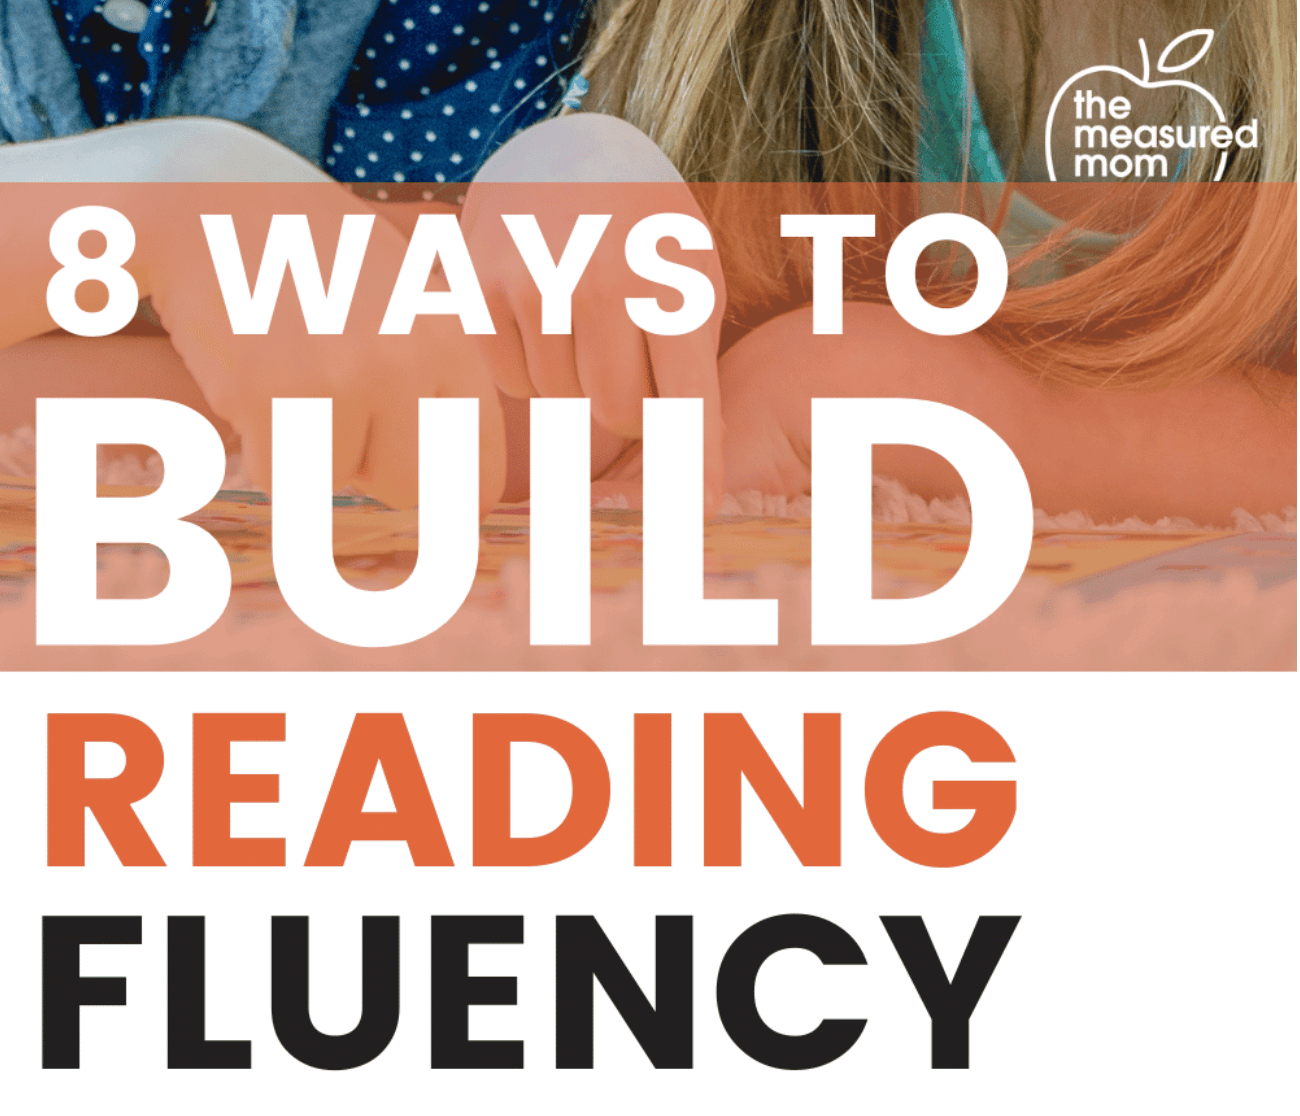 How to improve reading fluency - The Measured Mom